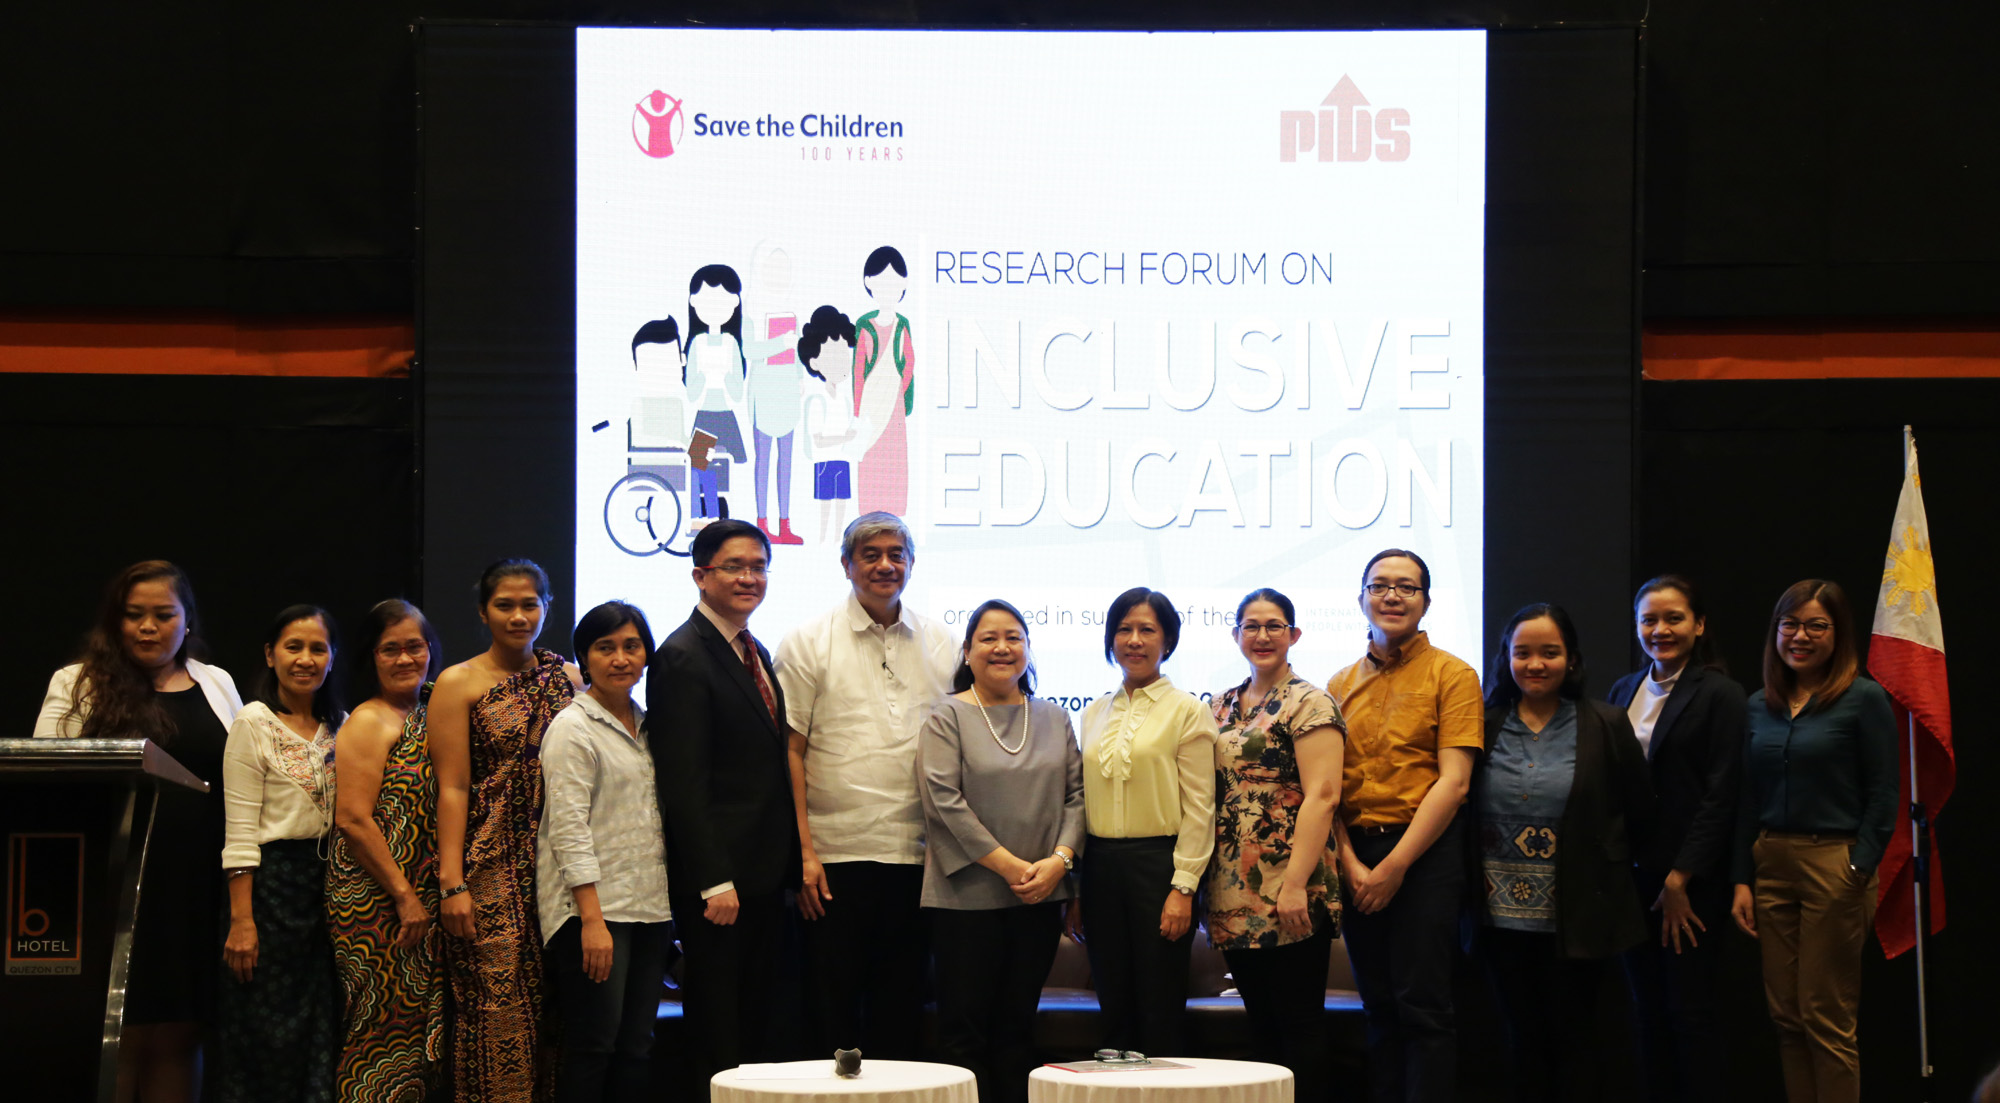 Research Forum on Inclusive Education-pids-scp-1-20191212.jpg